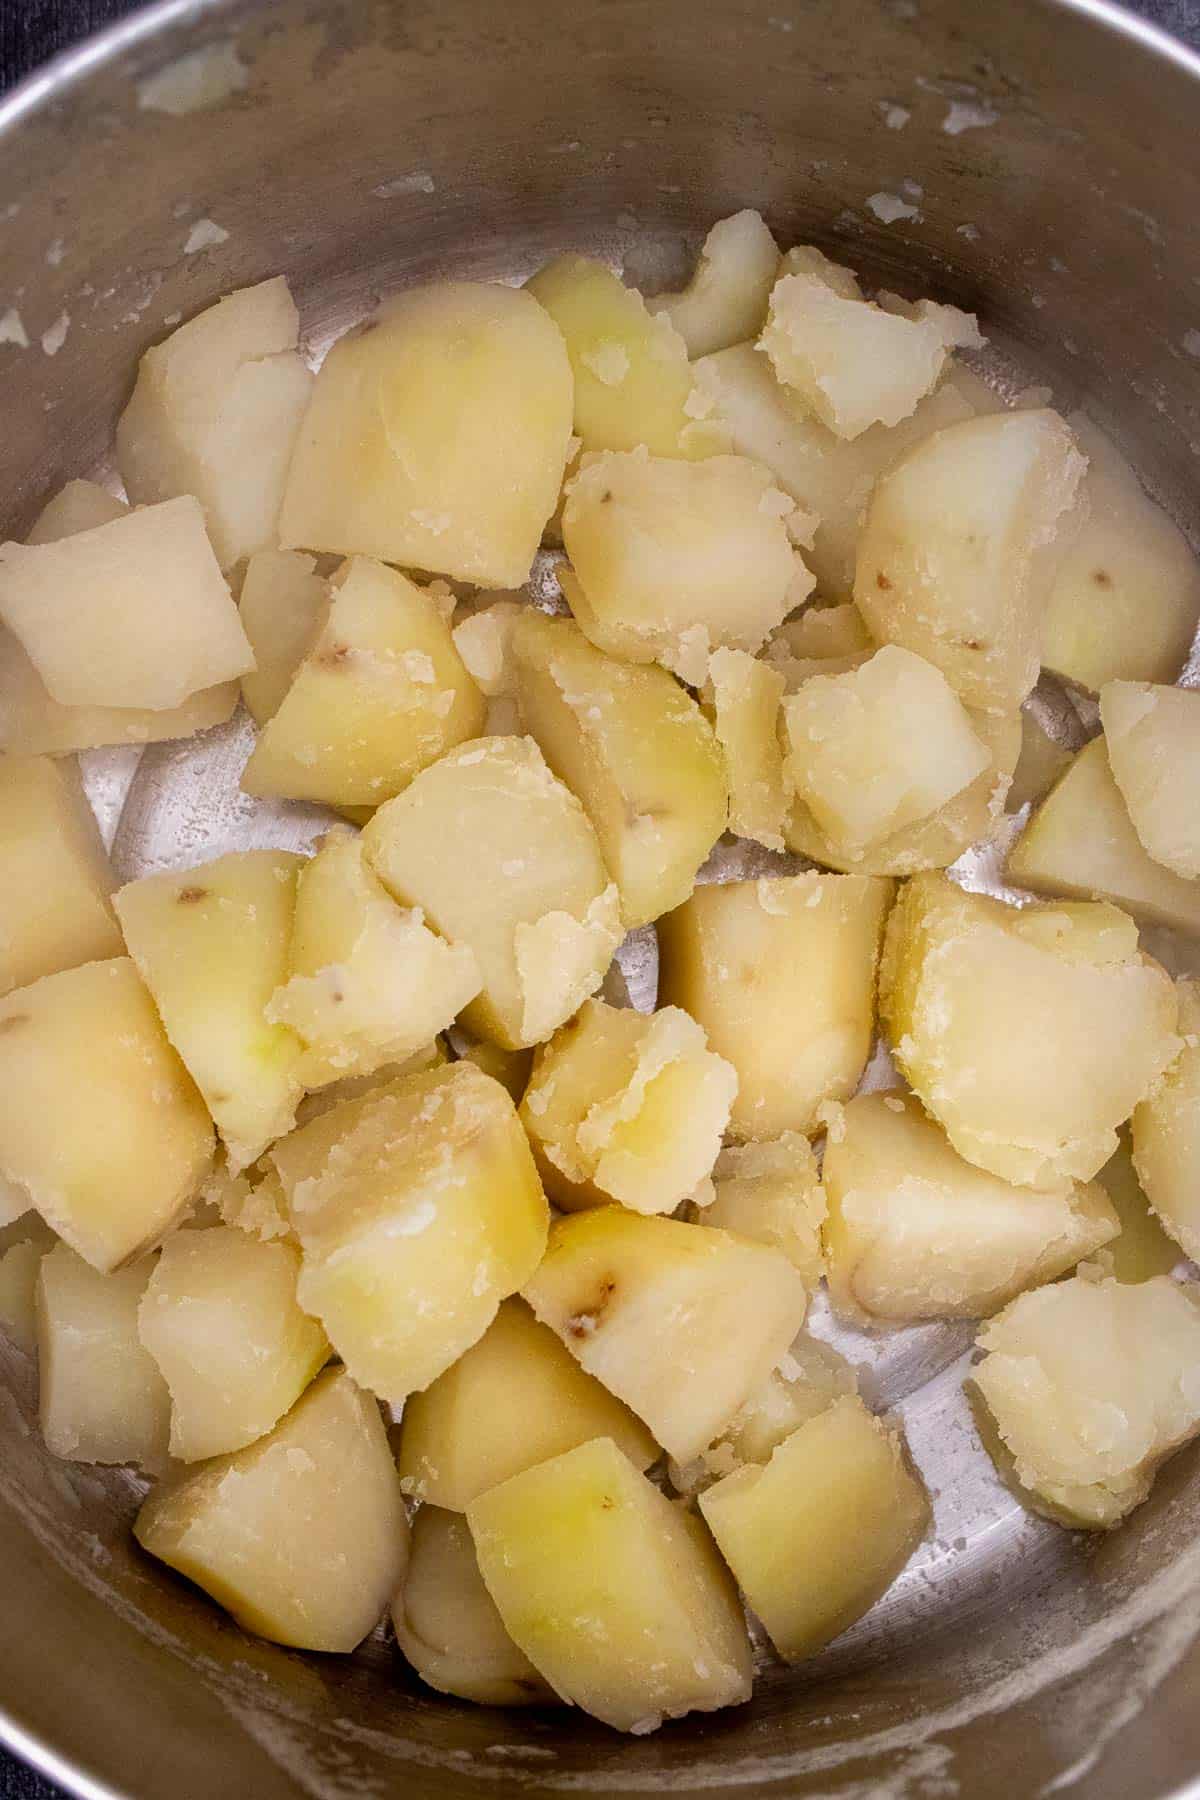 Cooked potatoes in hot pot to cook off excess water.